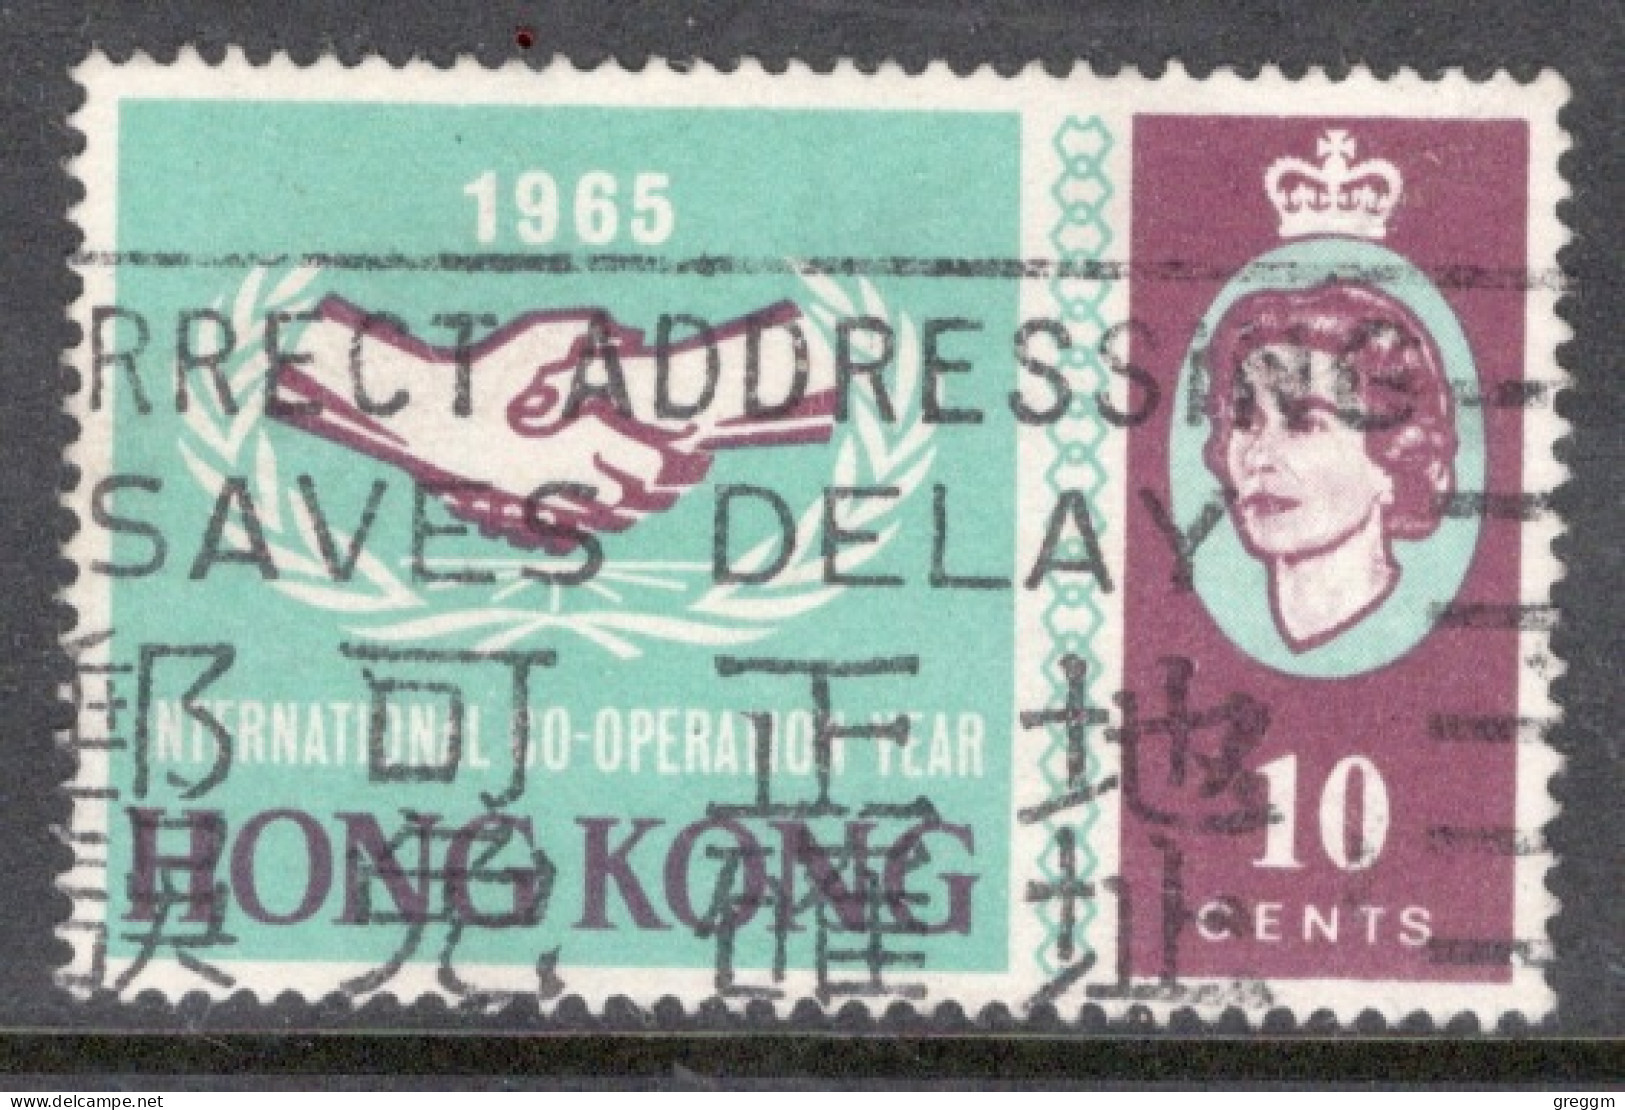 Hong Kong 1965 A Single Stamp From The I.C.Y. Set In Fine Used - Gebruikt